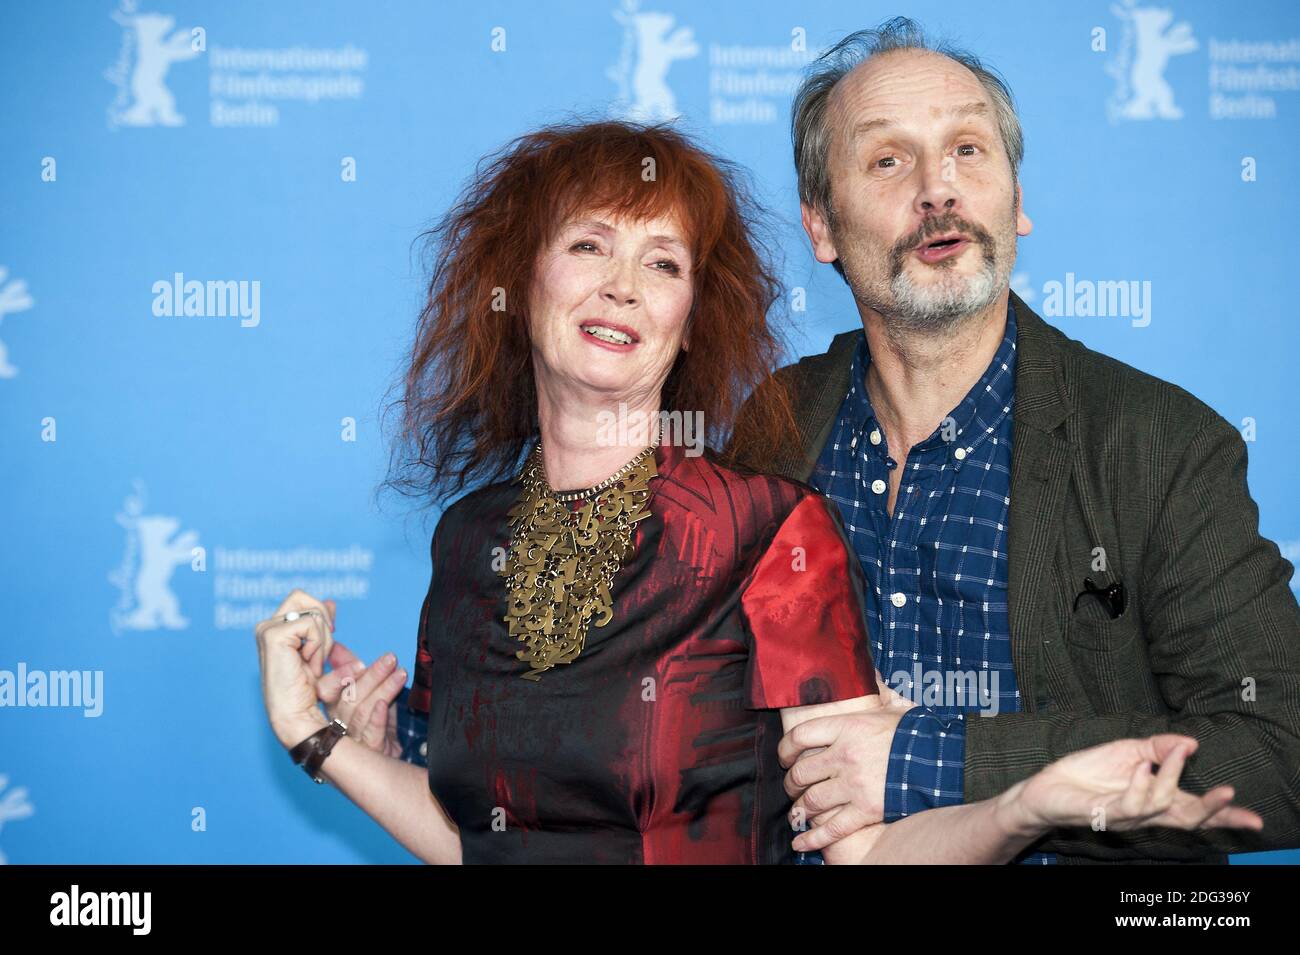 AIMER, BOIRE ET CHANTER  at the 64th Berlinale Film Festival Stock Photo